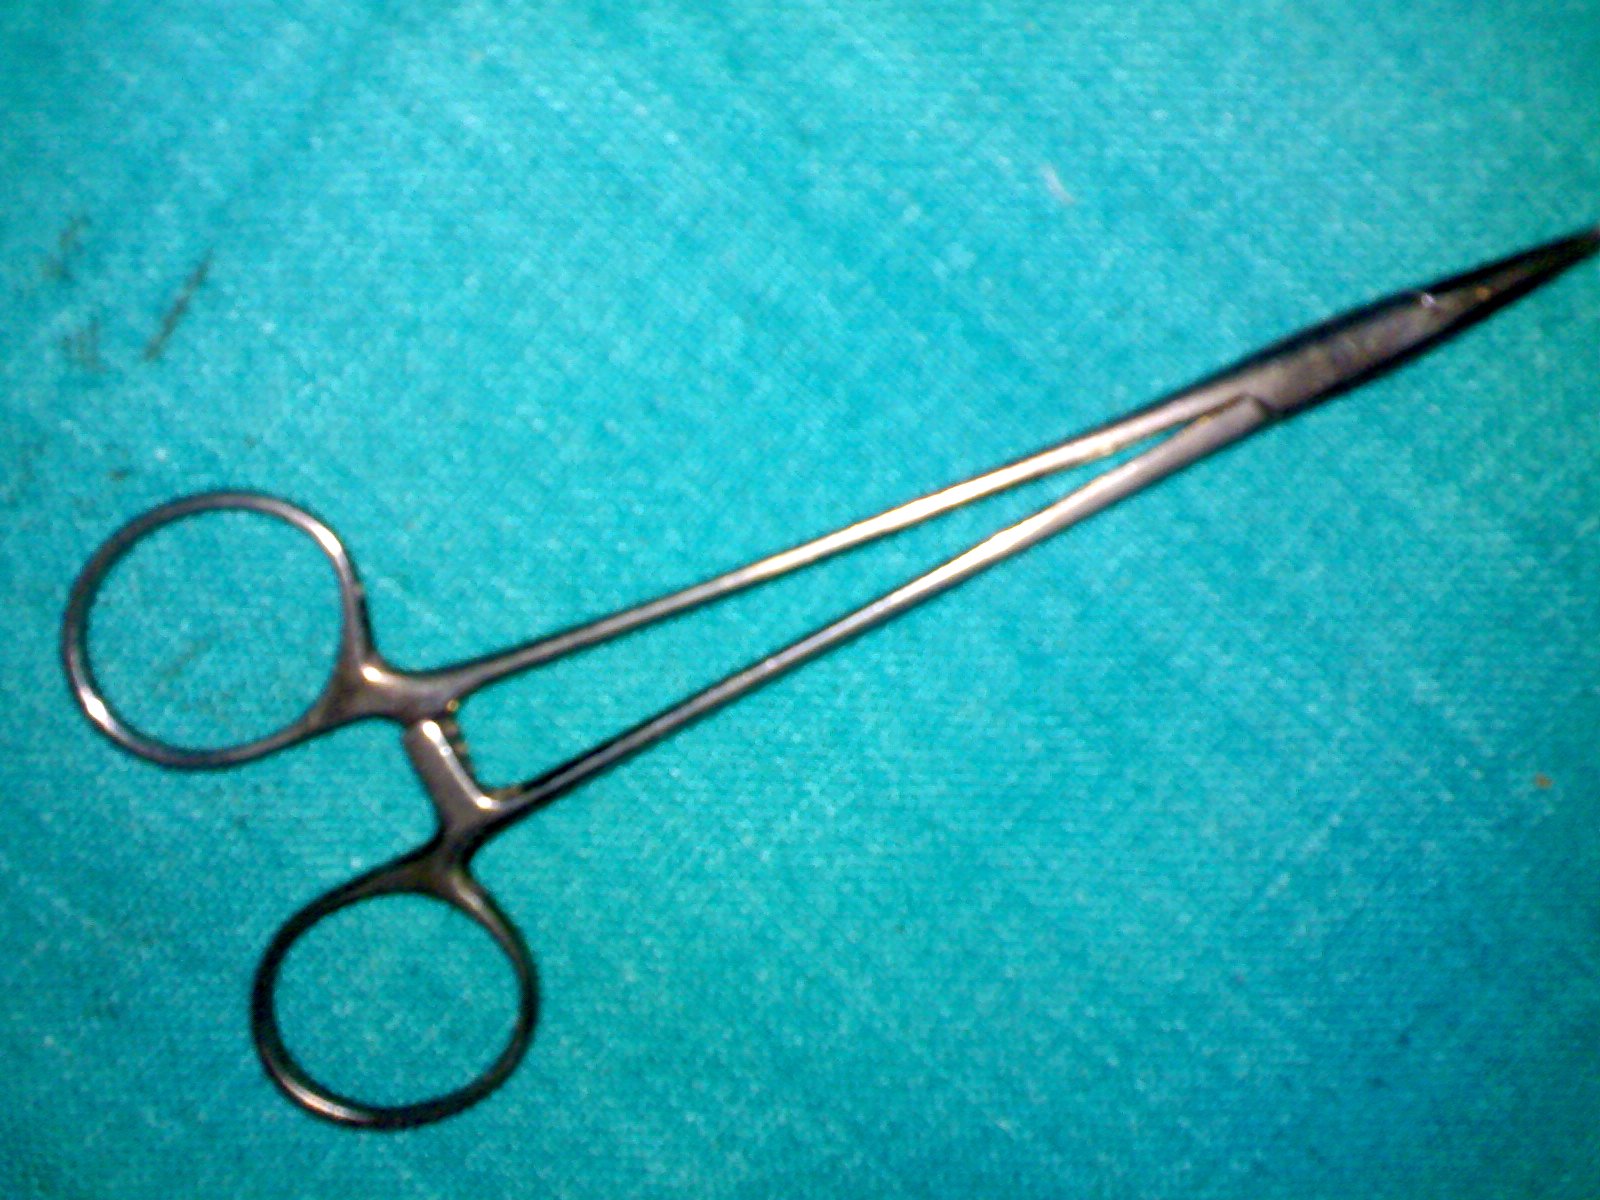 File:Medical Instrument Mosquito forceps.jpg - Wikimedia Commons